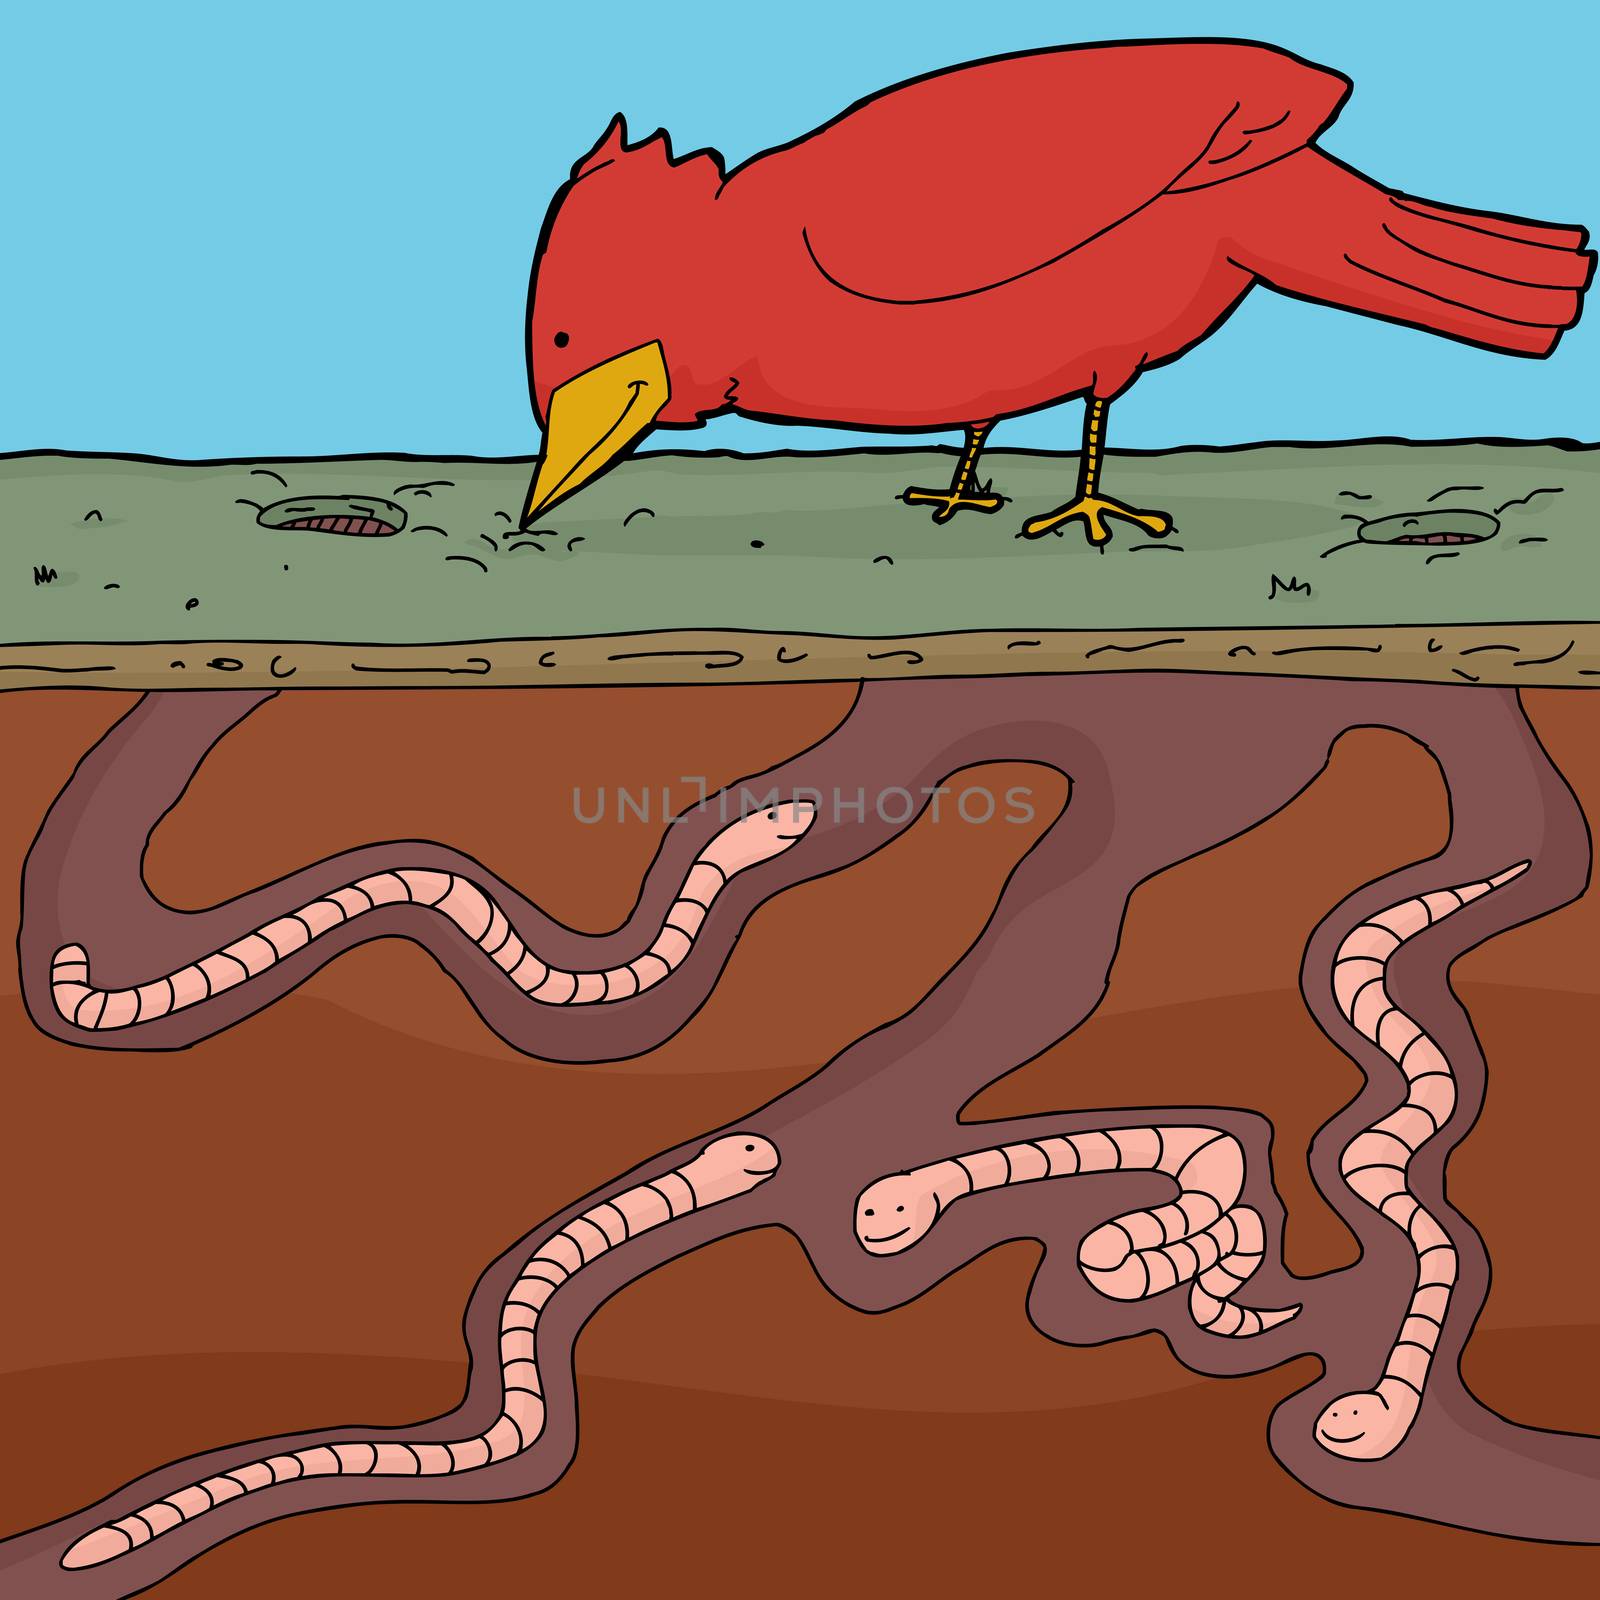 Happy red bird pecking ground with tunnelling earthworms